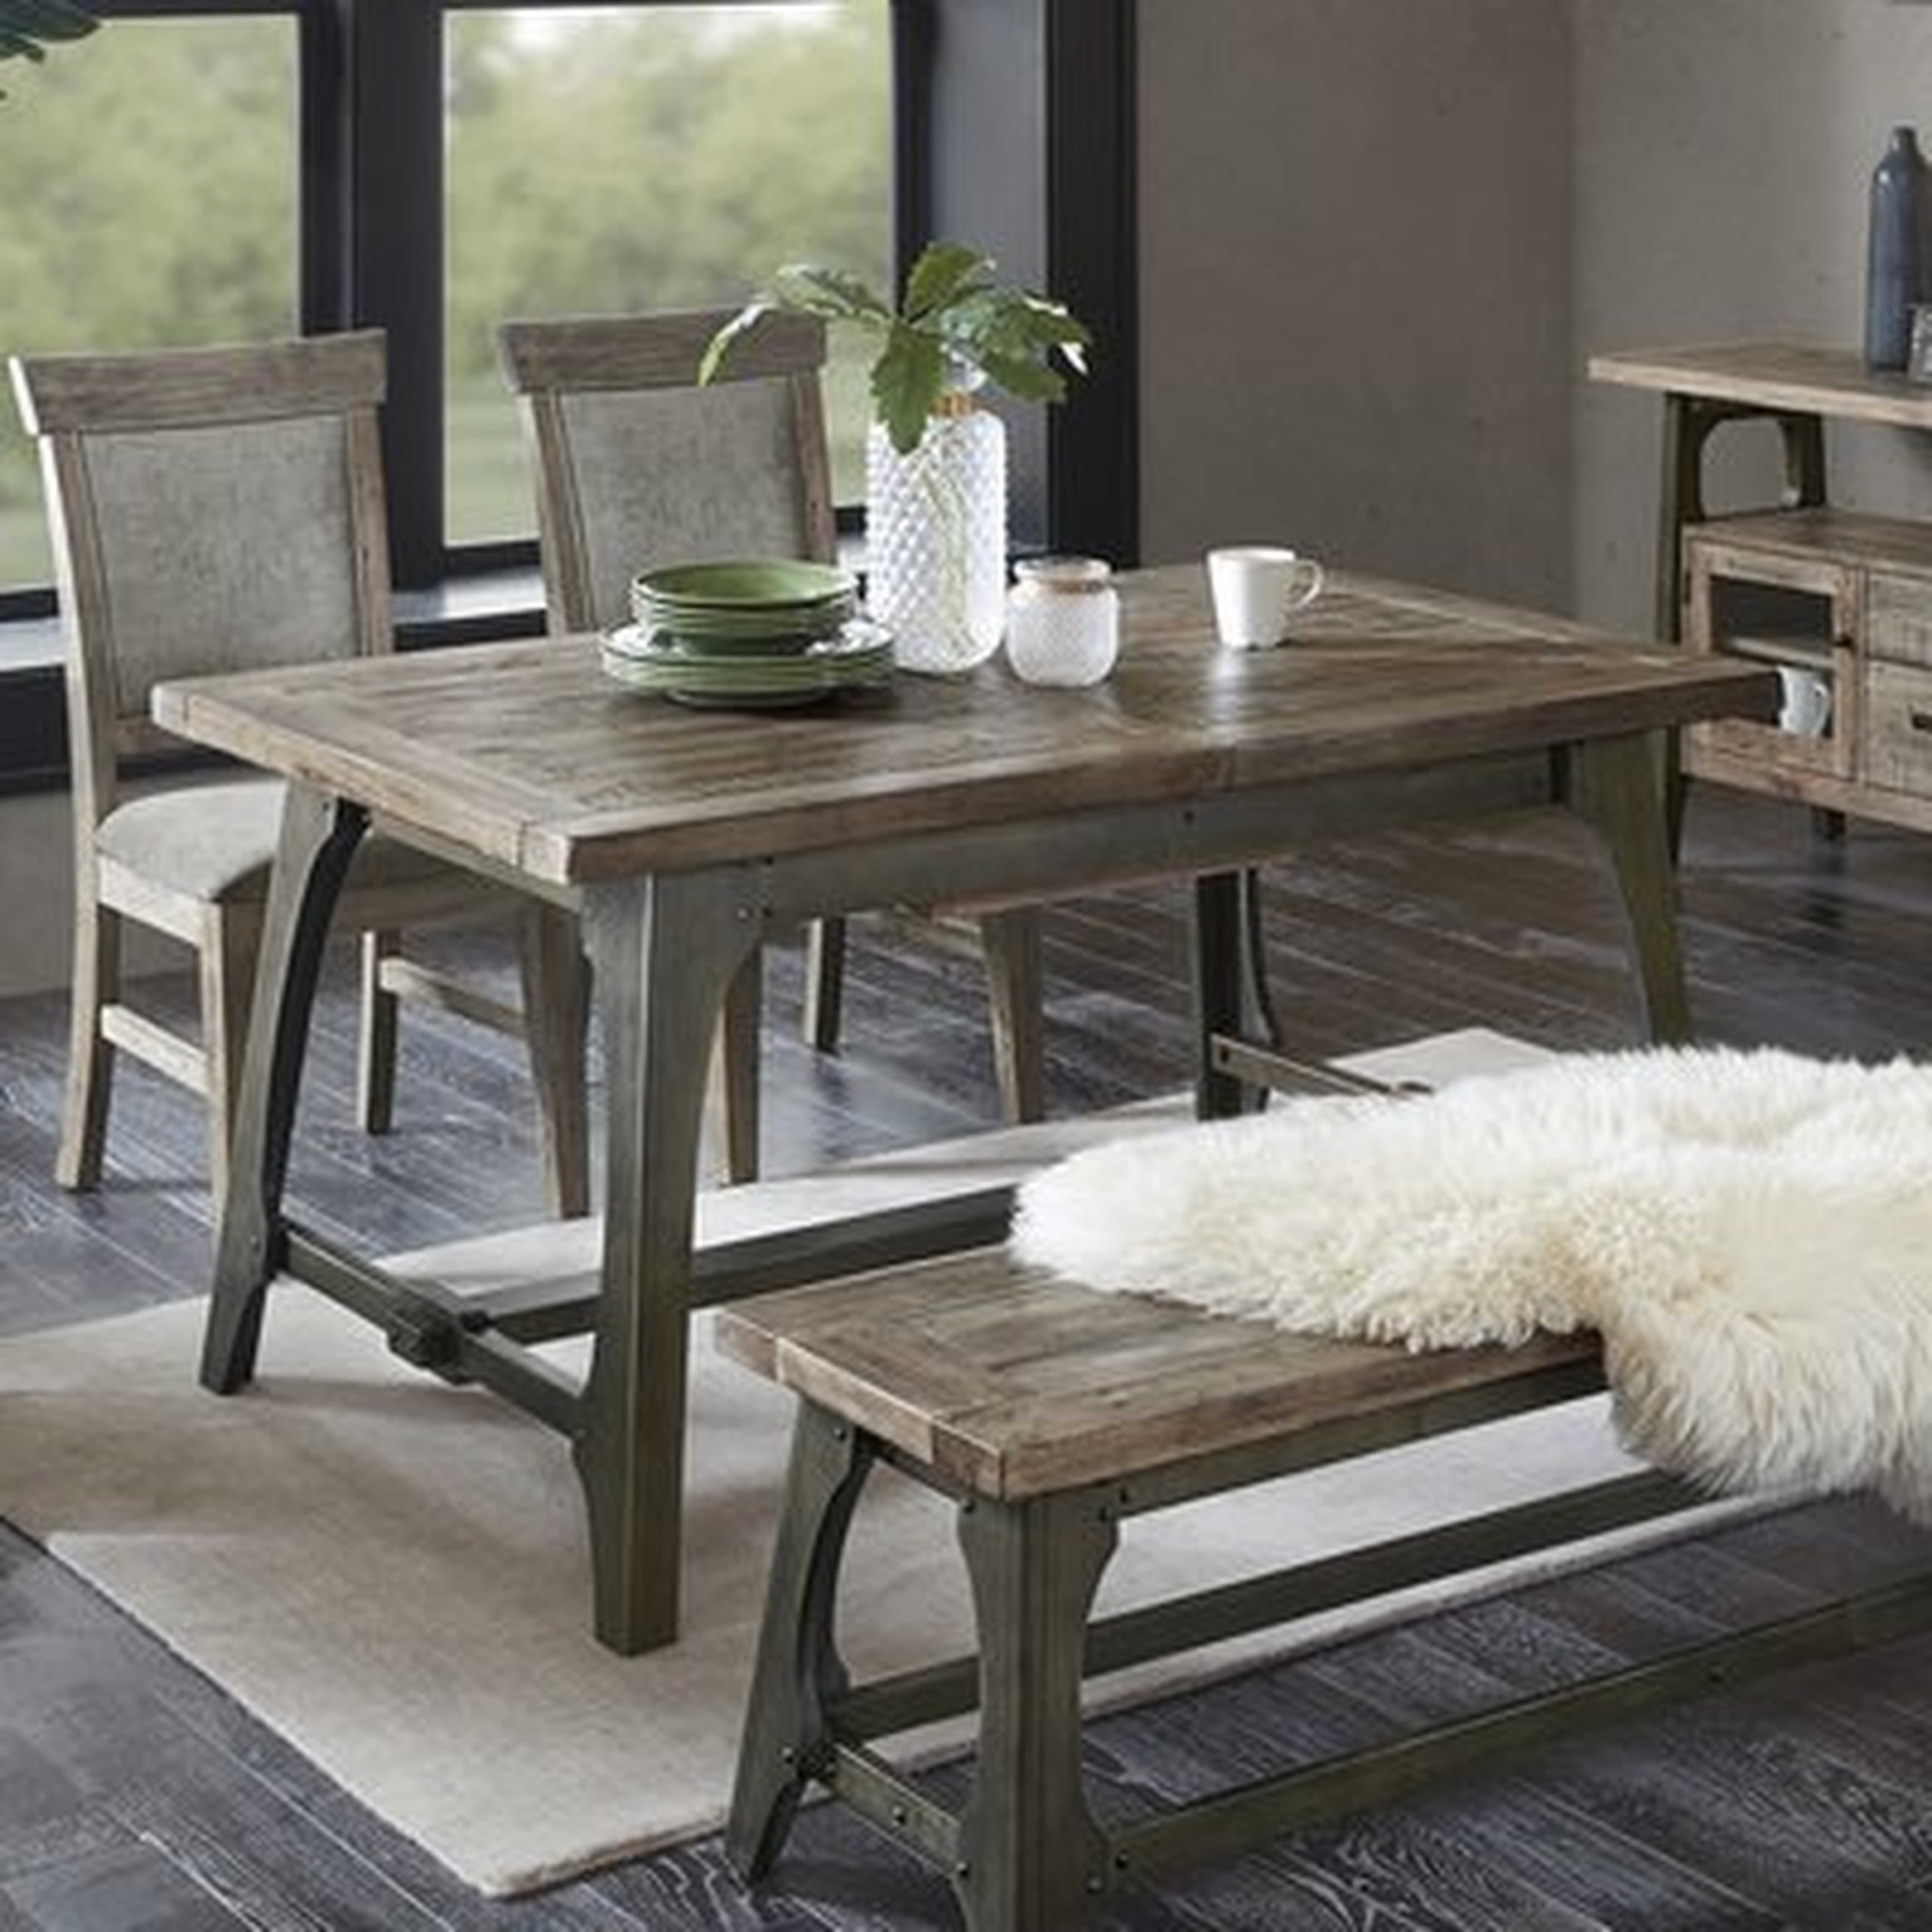 Casimir Extendable Solid Wood Dining Table - Birch Lane